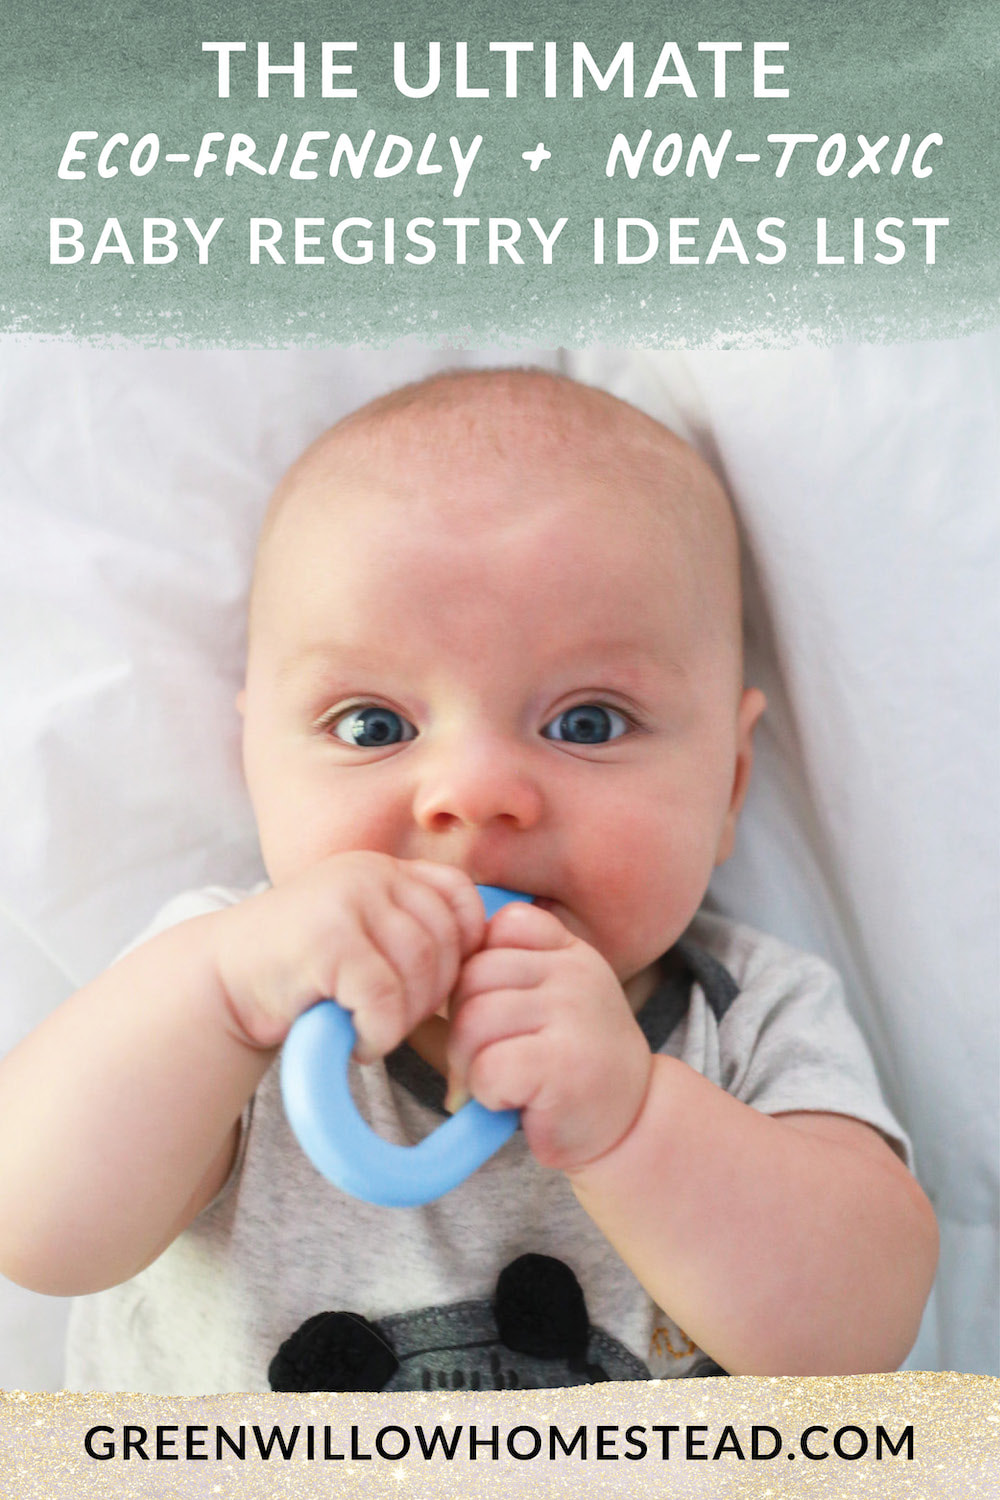 The Ultimate Eco-Friendly Non-Toxic Baby Registry Ideas List